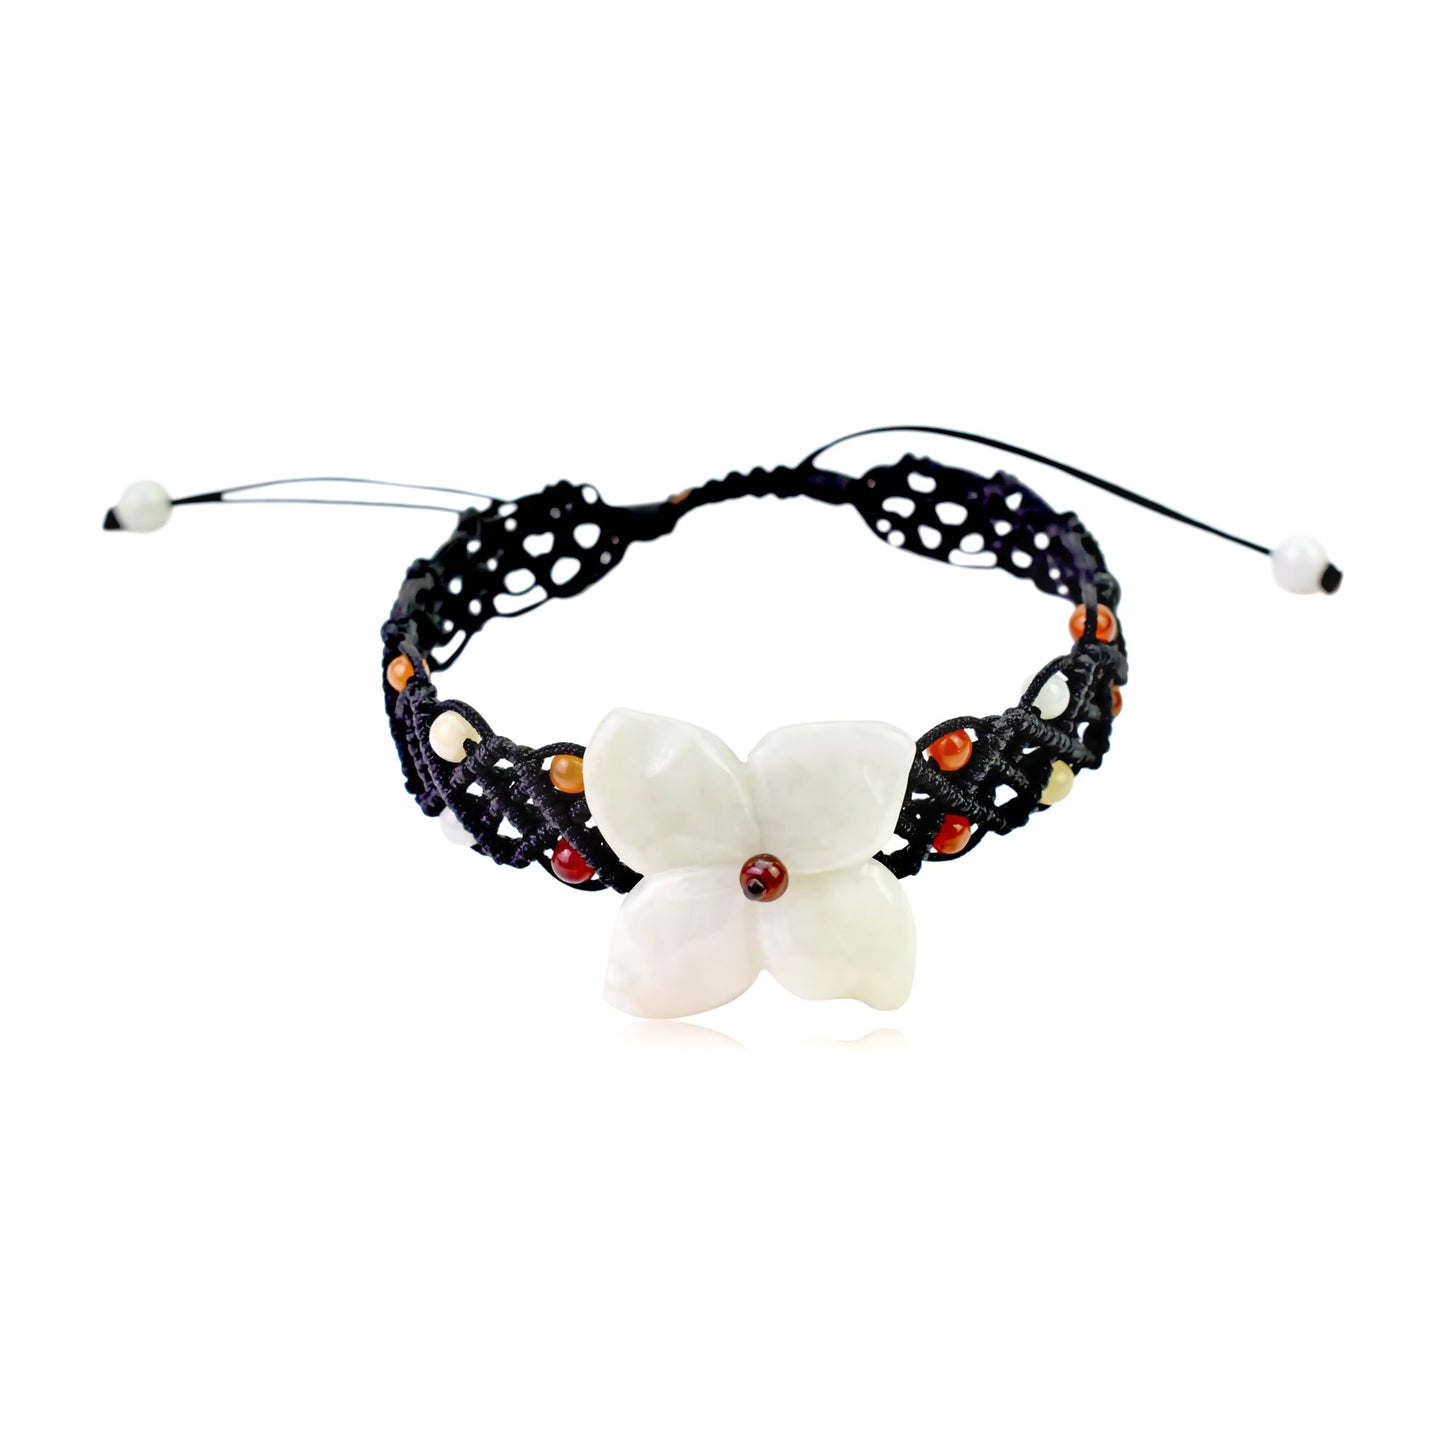 Look Gorgeous with the Peruvian Lily Flower Bracelet made with Black Cord